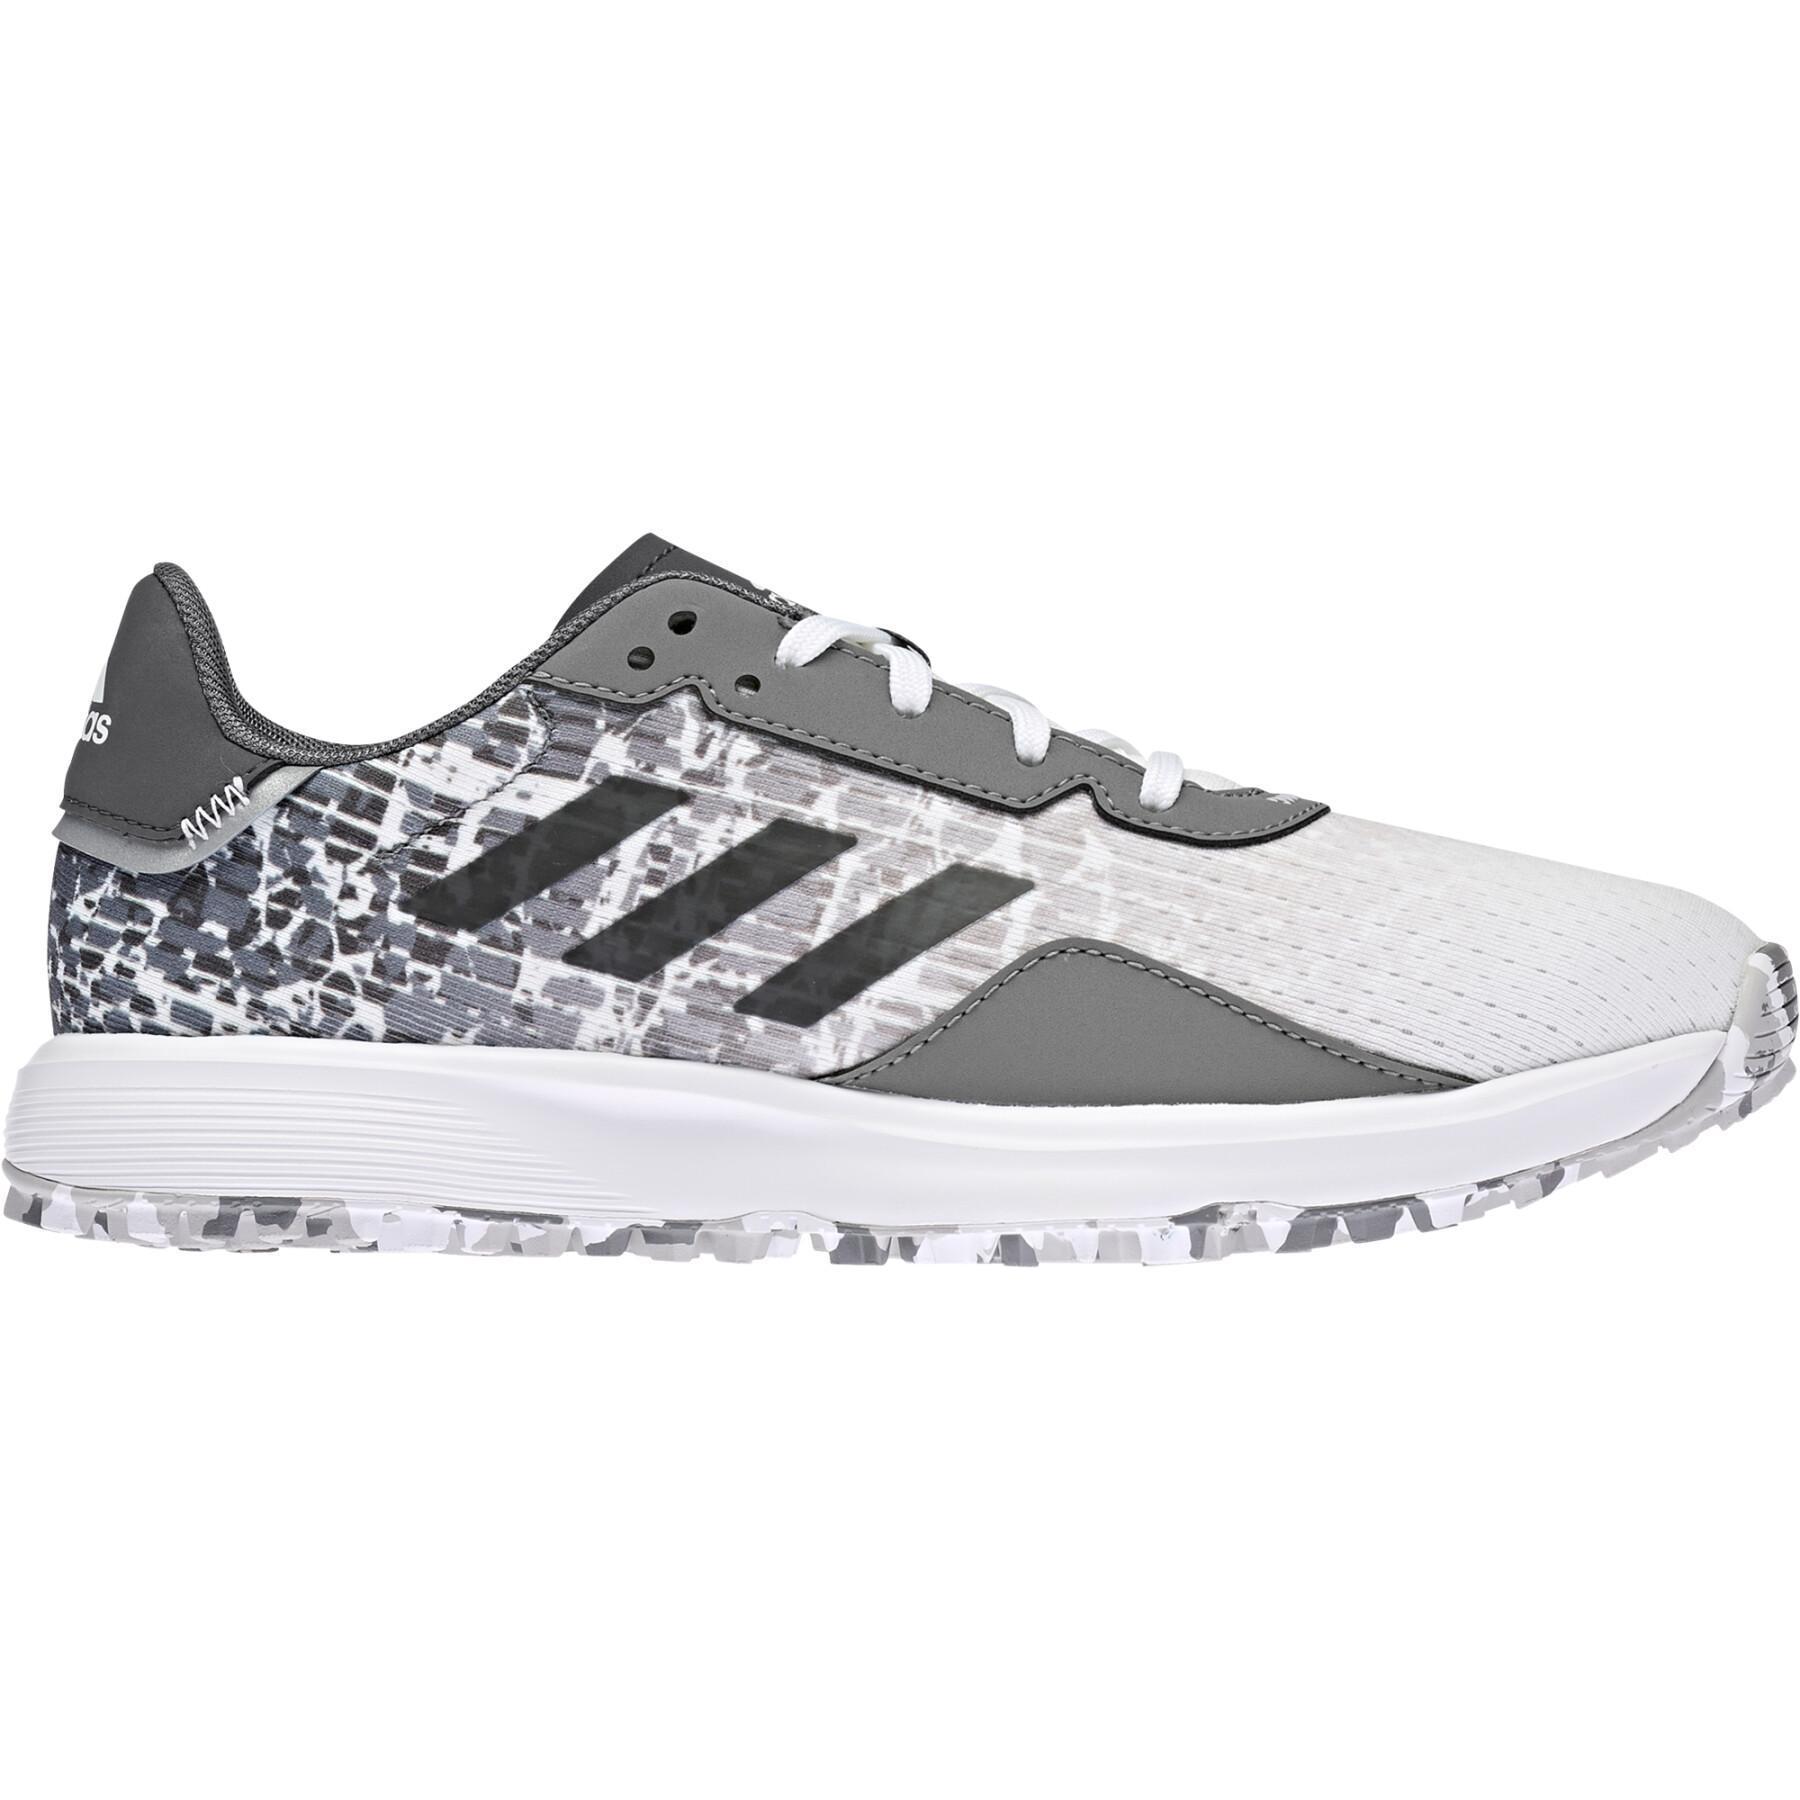 Shoes adidas S2G SL